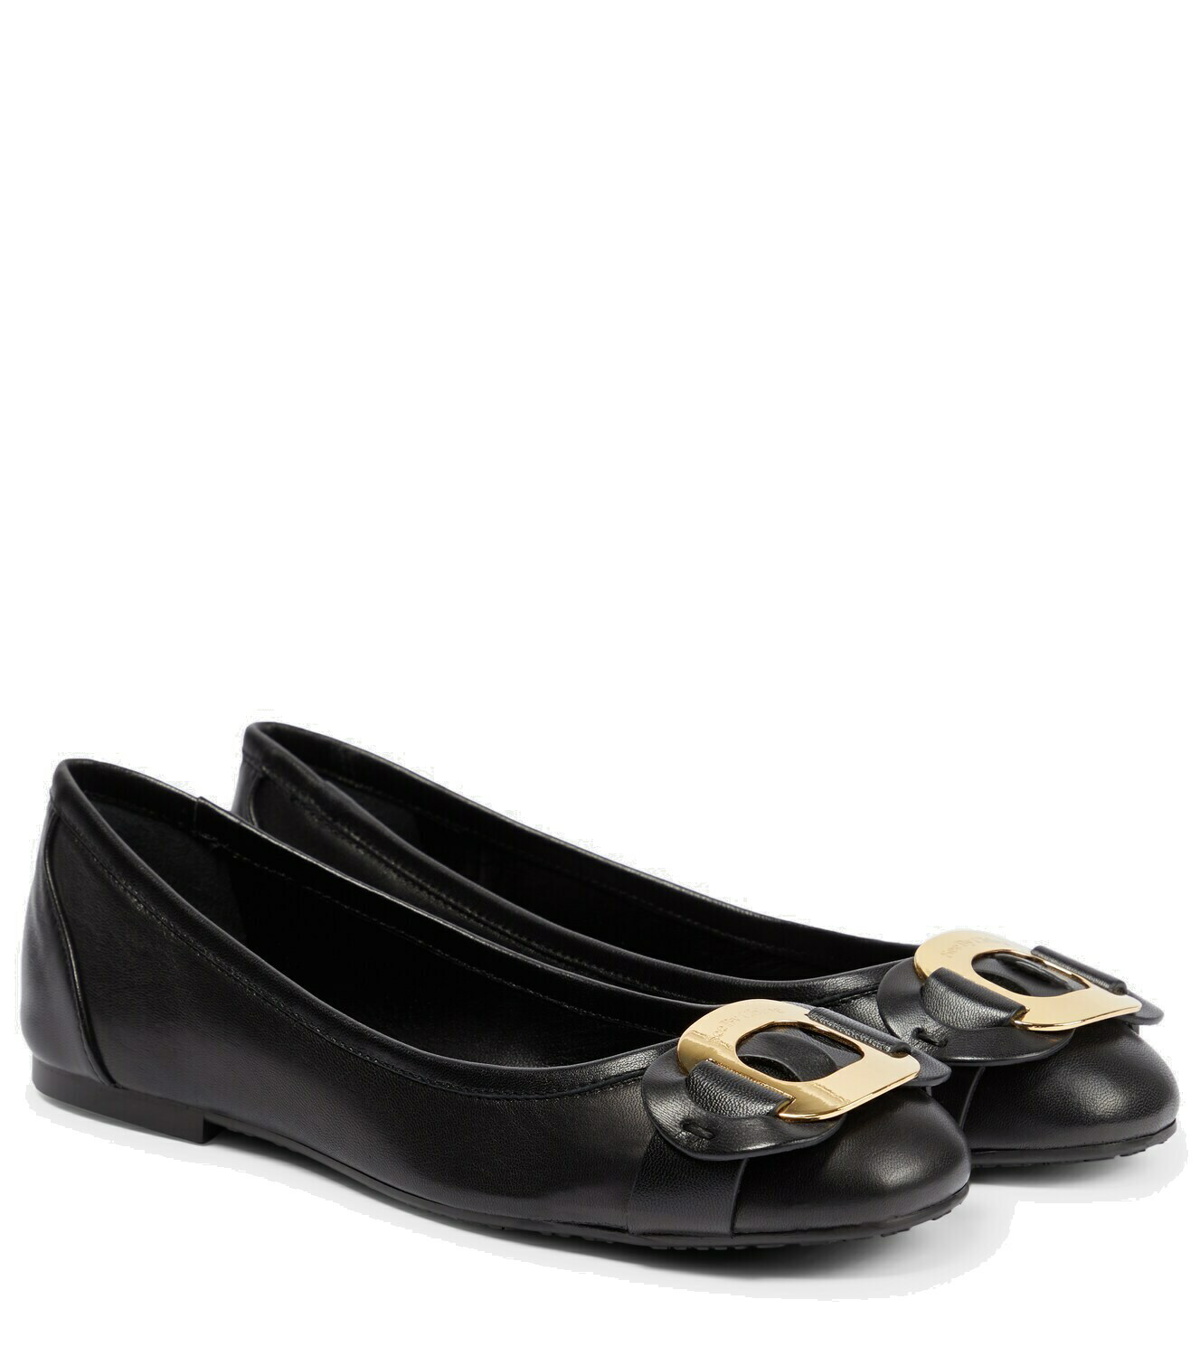 Chany leather ballet flats in beige - See By Chloe